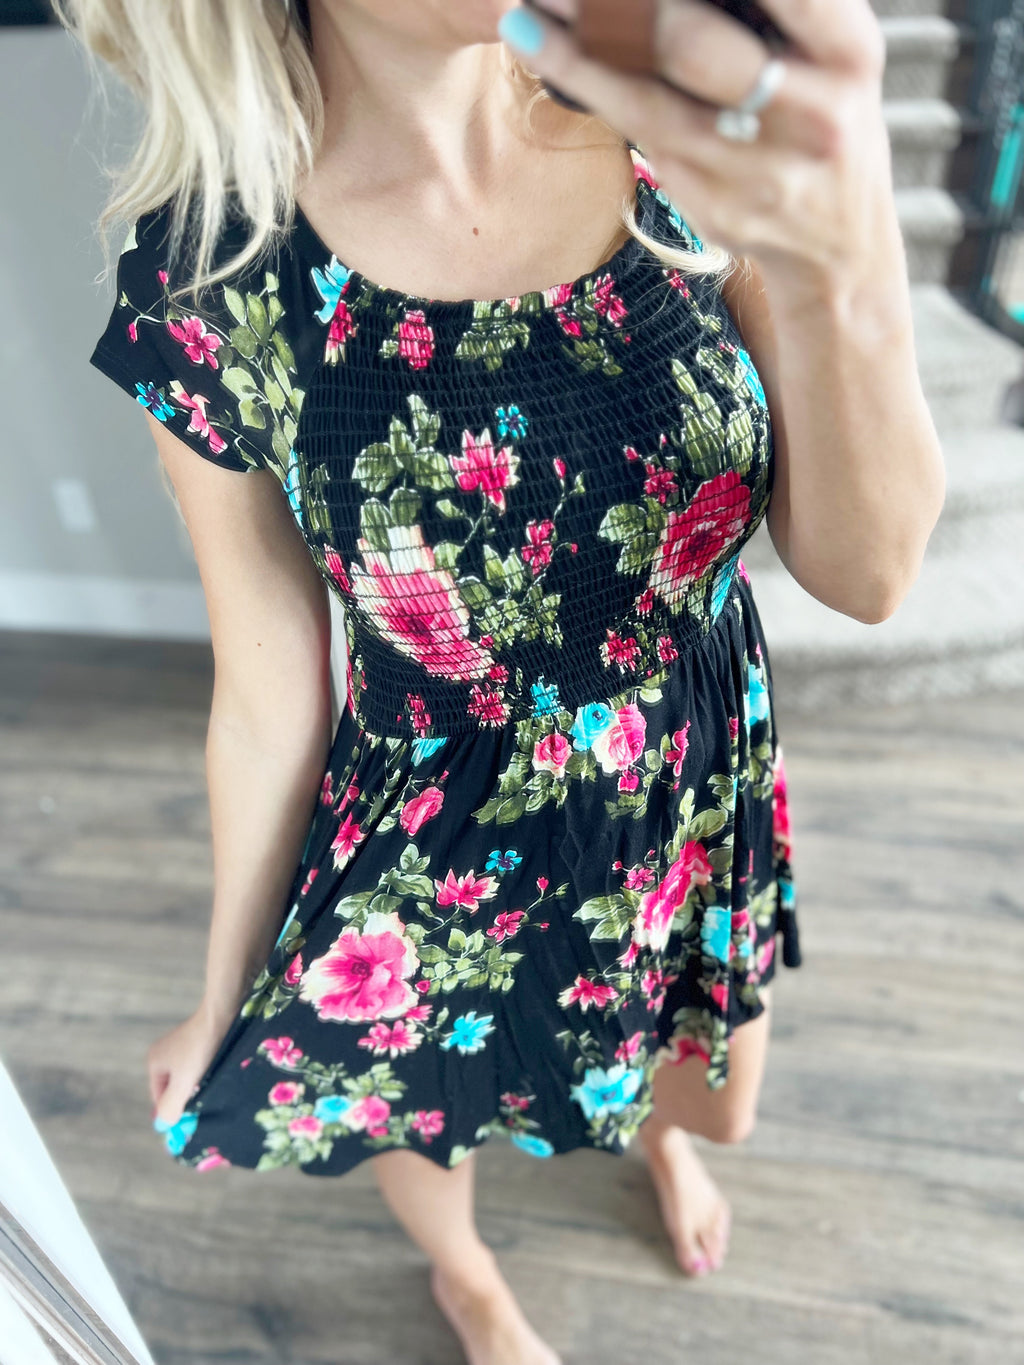 Tell Me I'm Pretty Dress in Black and Bright Floral